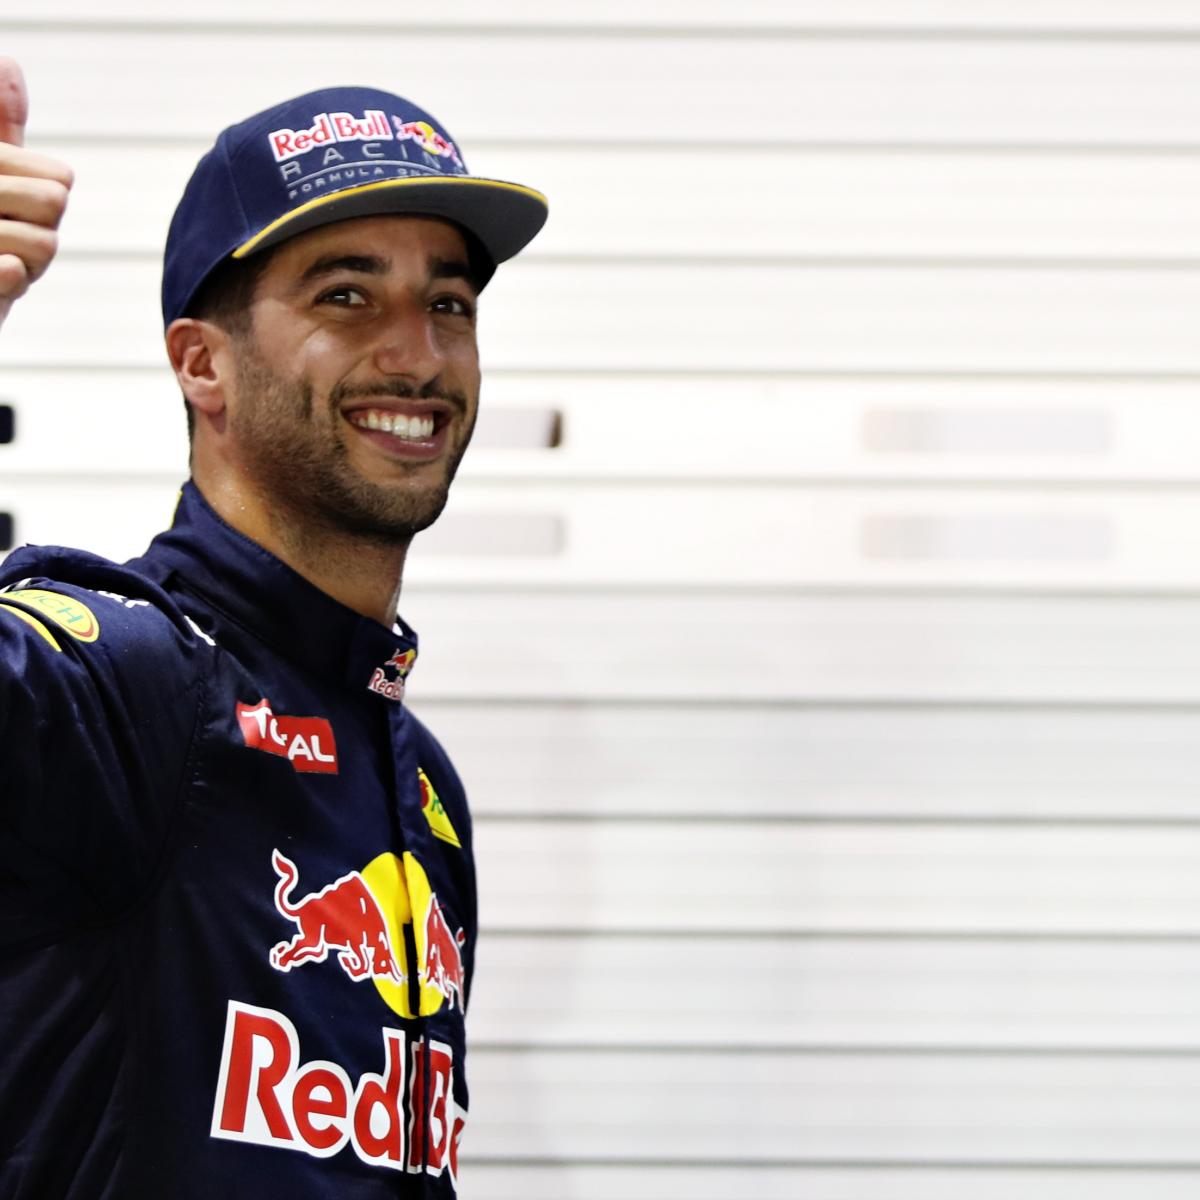 Daniel Ricciardo's Continued Success Could Cause Problems for Red Bull ...